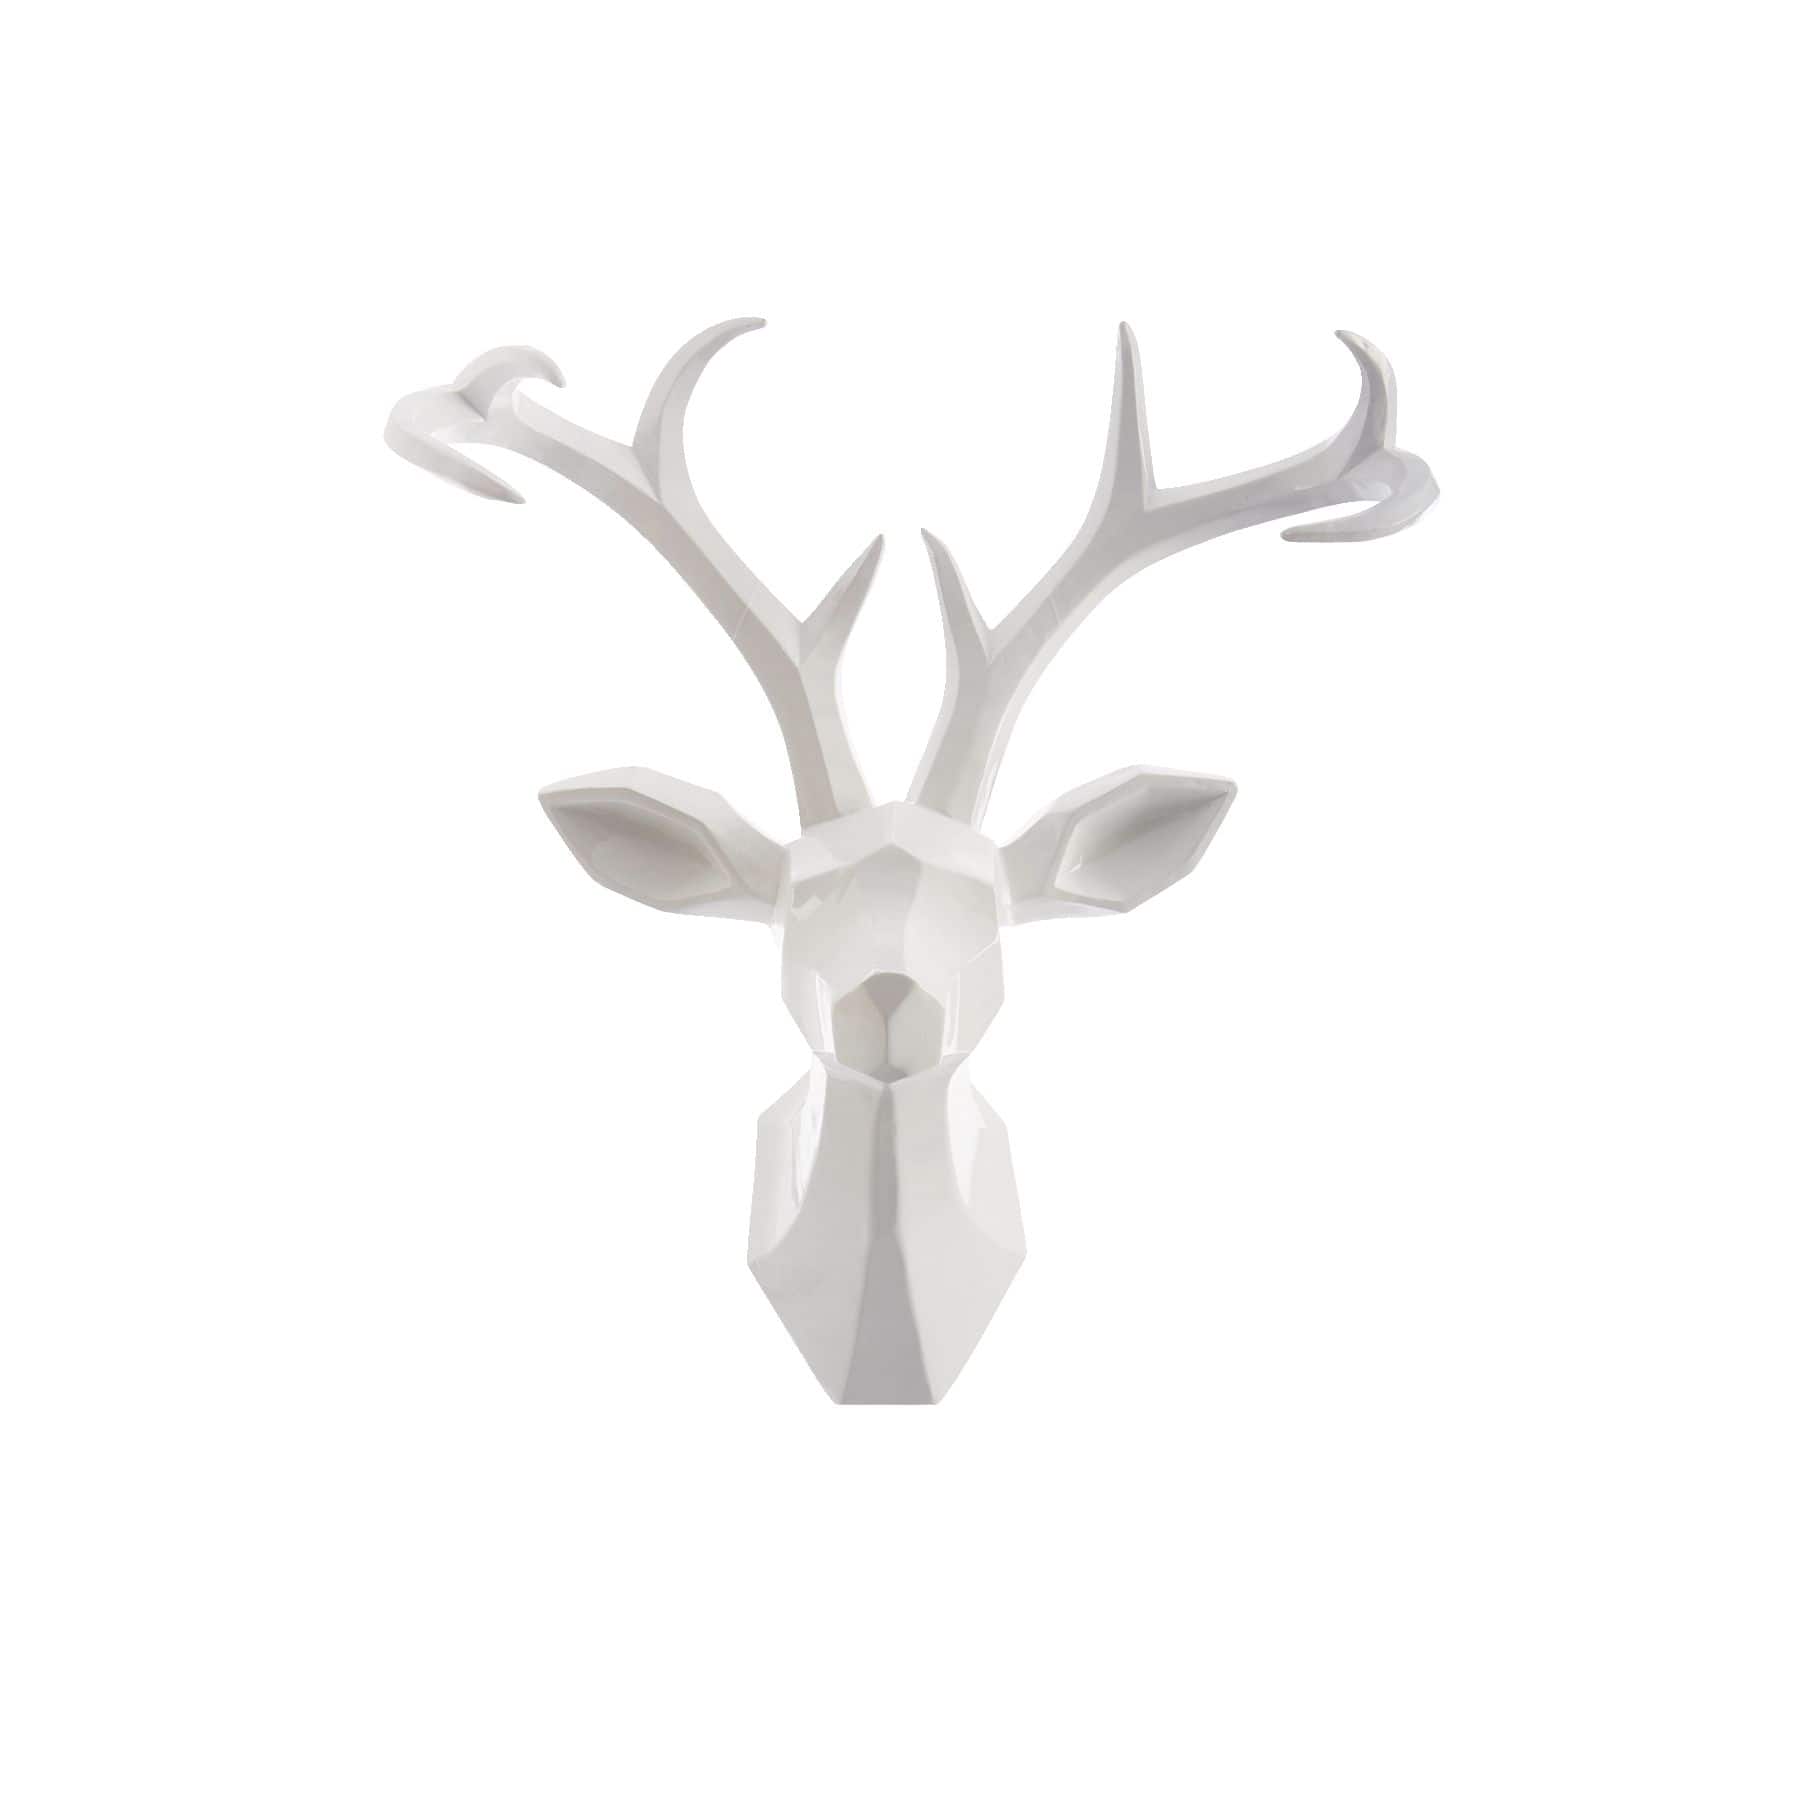 White Reindeer Ornaments for Christmas Tree, Plastic Glitter Reindeer  Hanging Figurine Ornament Set of 4 Packs for Christmas Decoration, 5.5  Inches